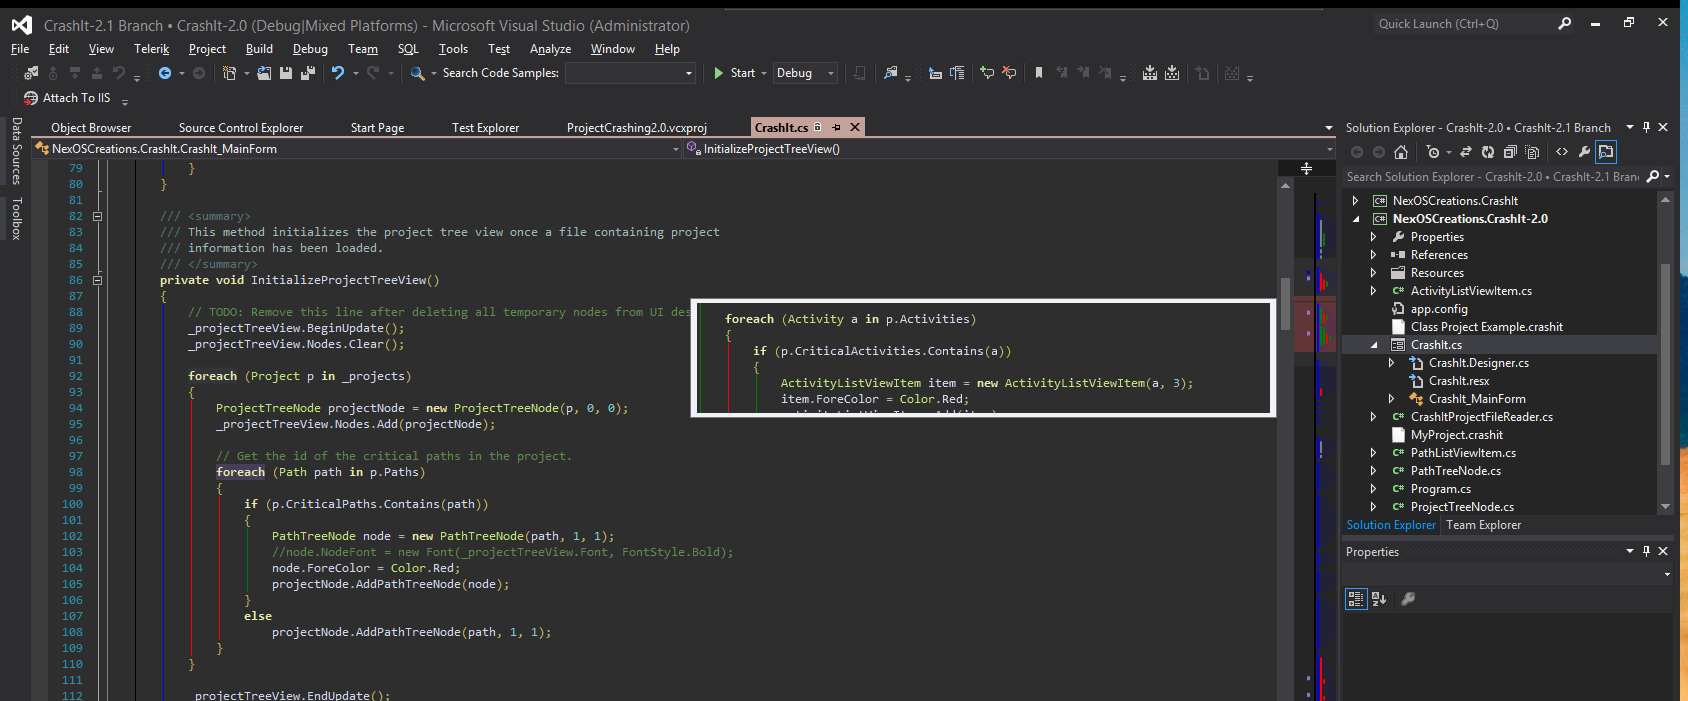 A partial full screen view of AllMargins 2012 running in Visual Studio 2012 with the Dark theme.